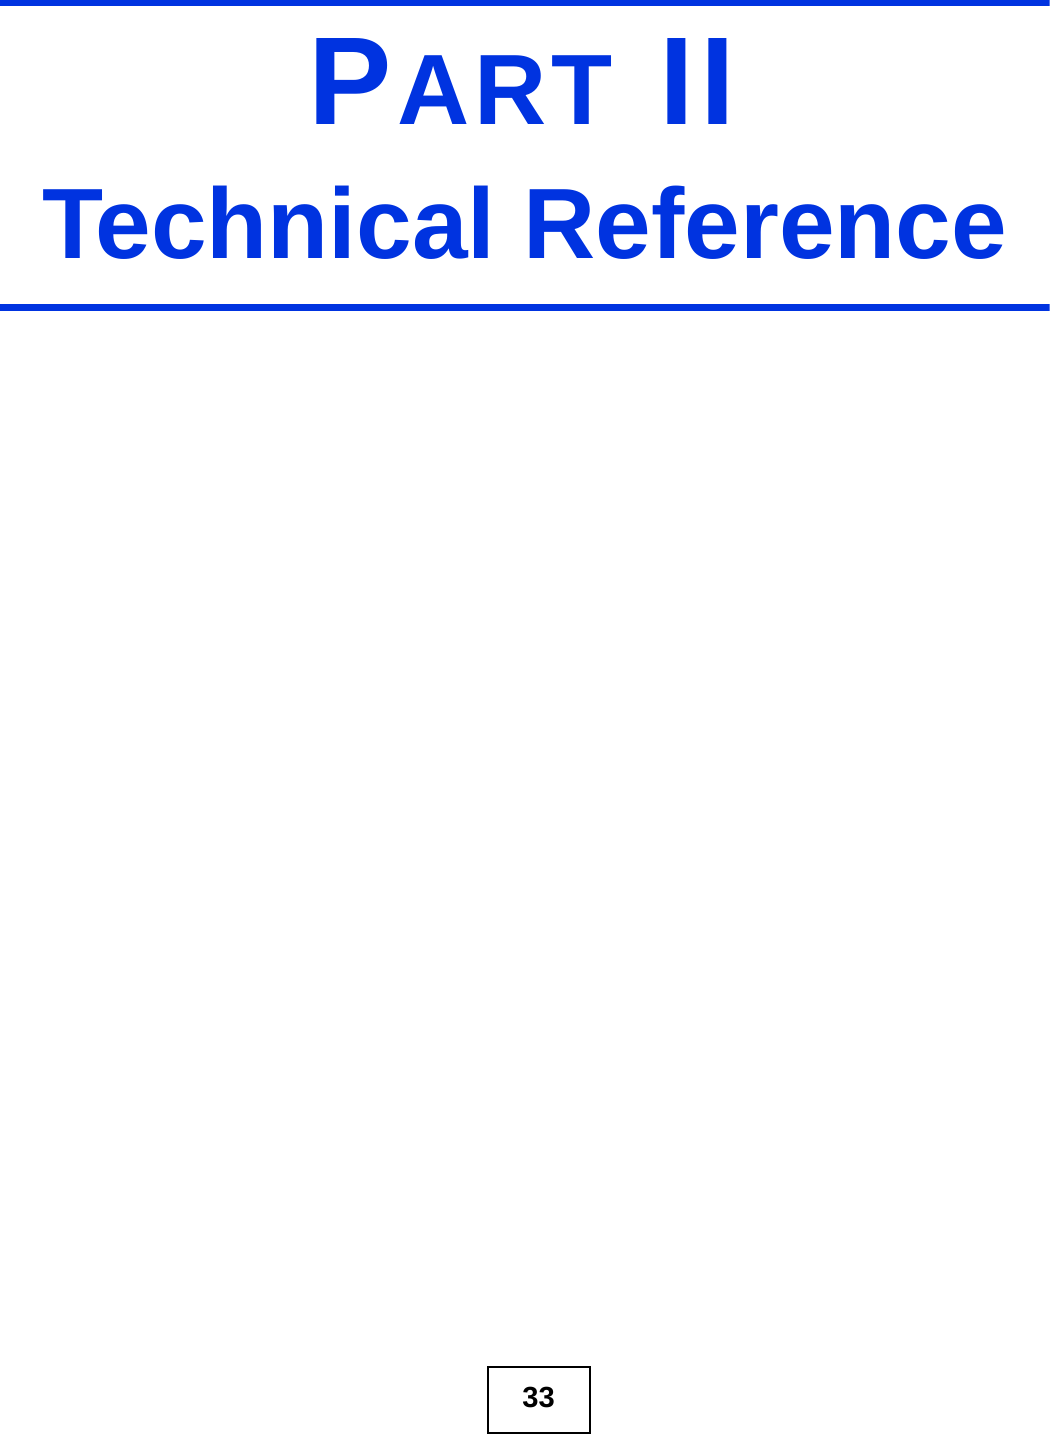 33PART IITechnical Reference